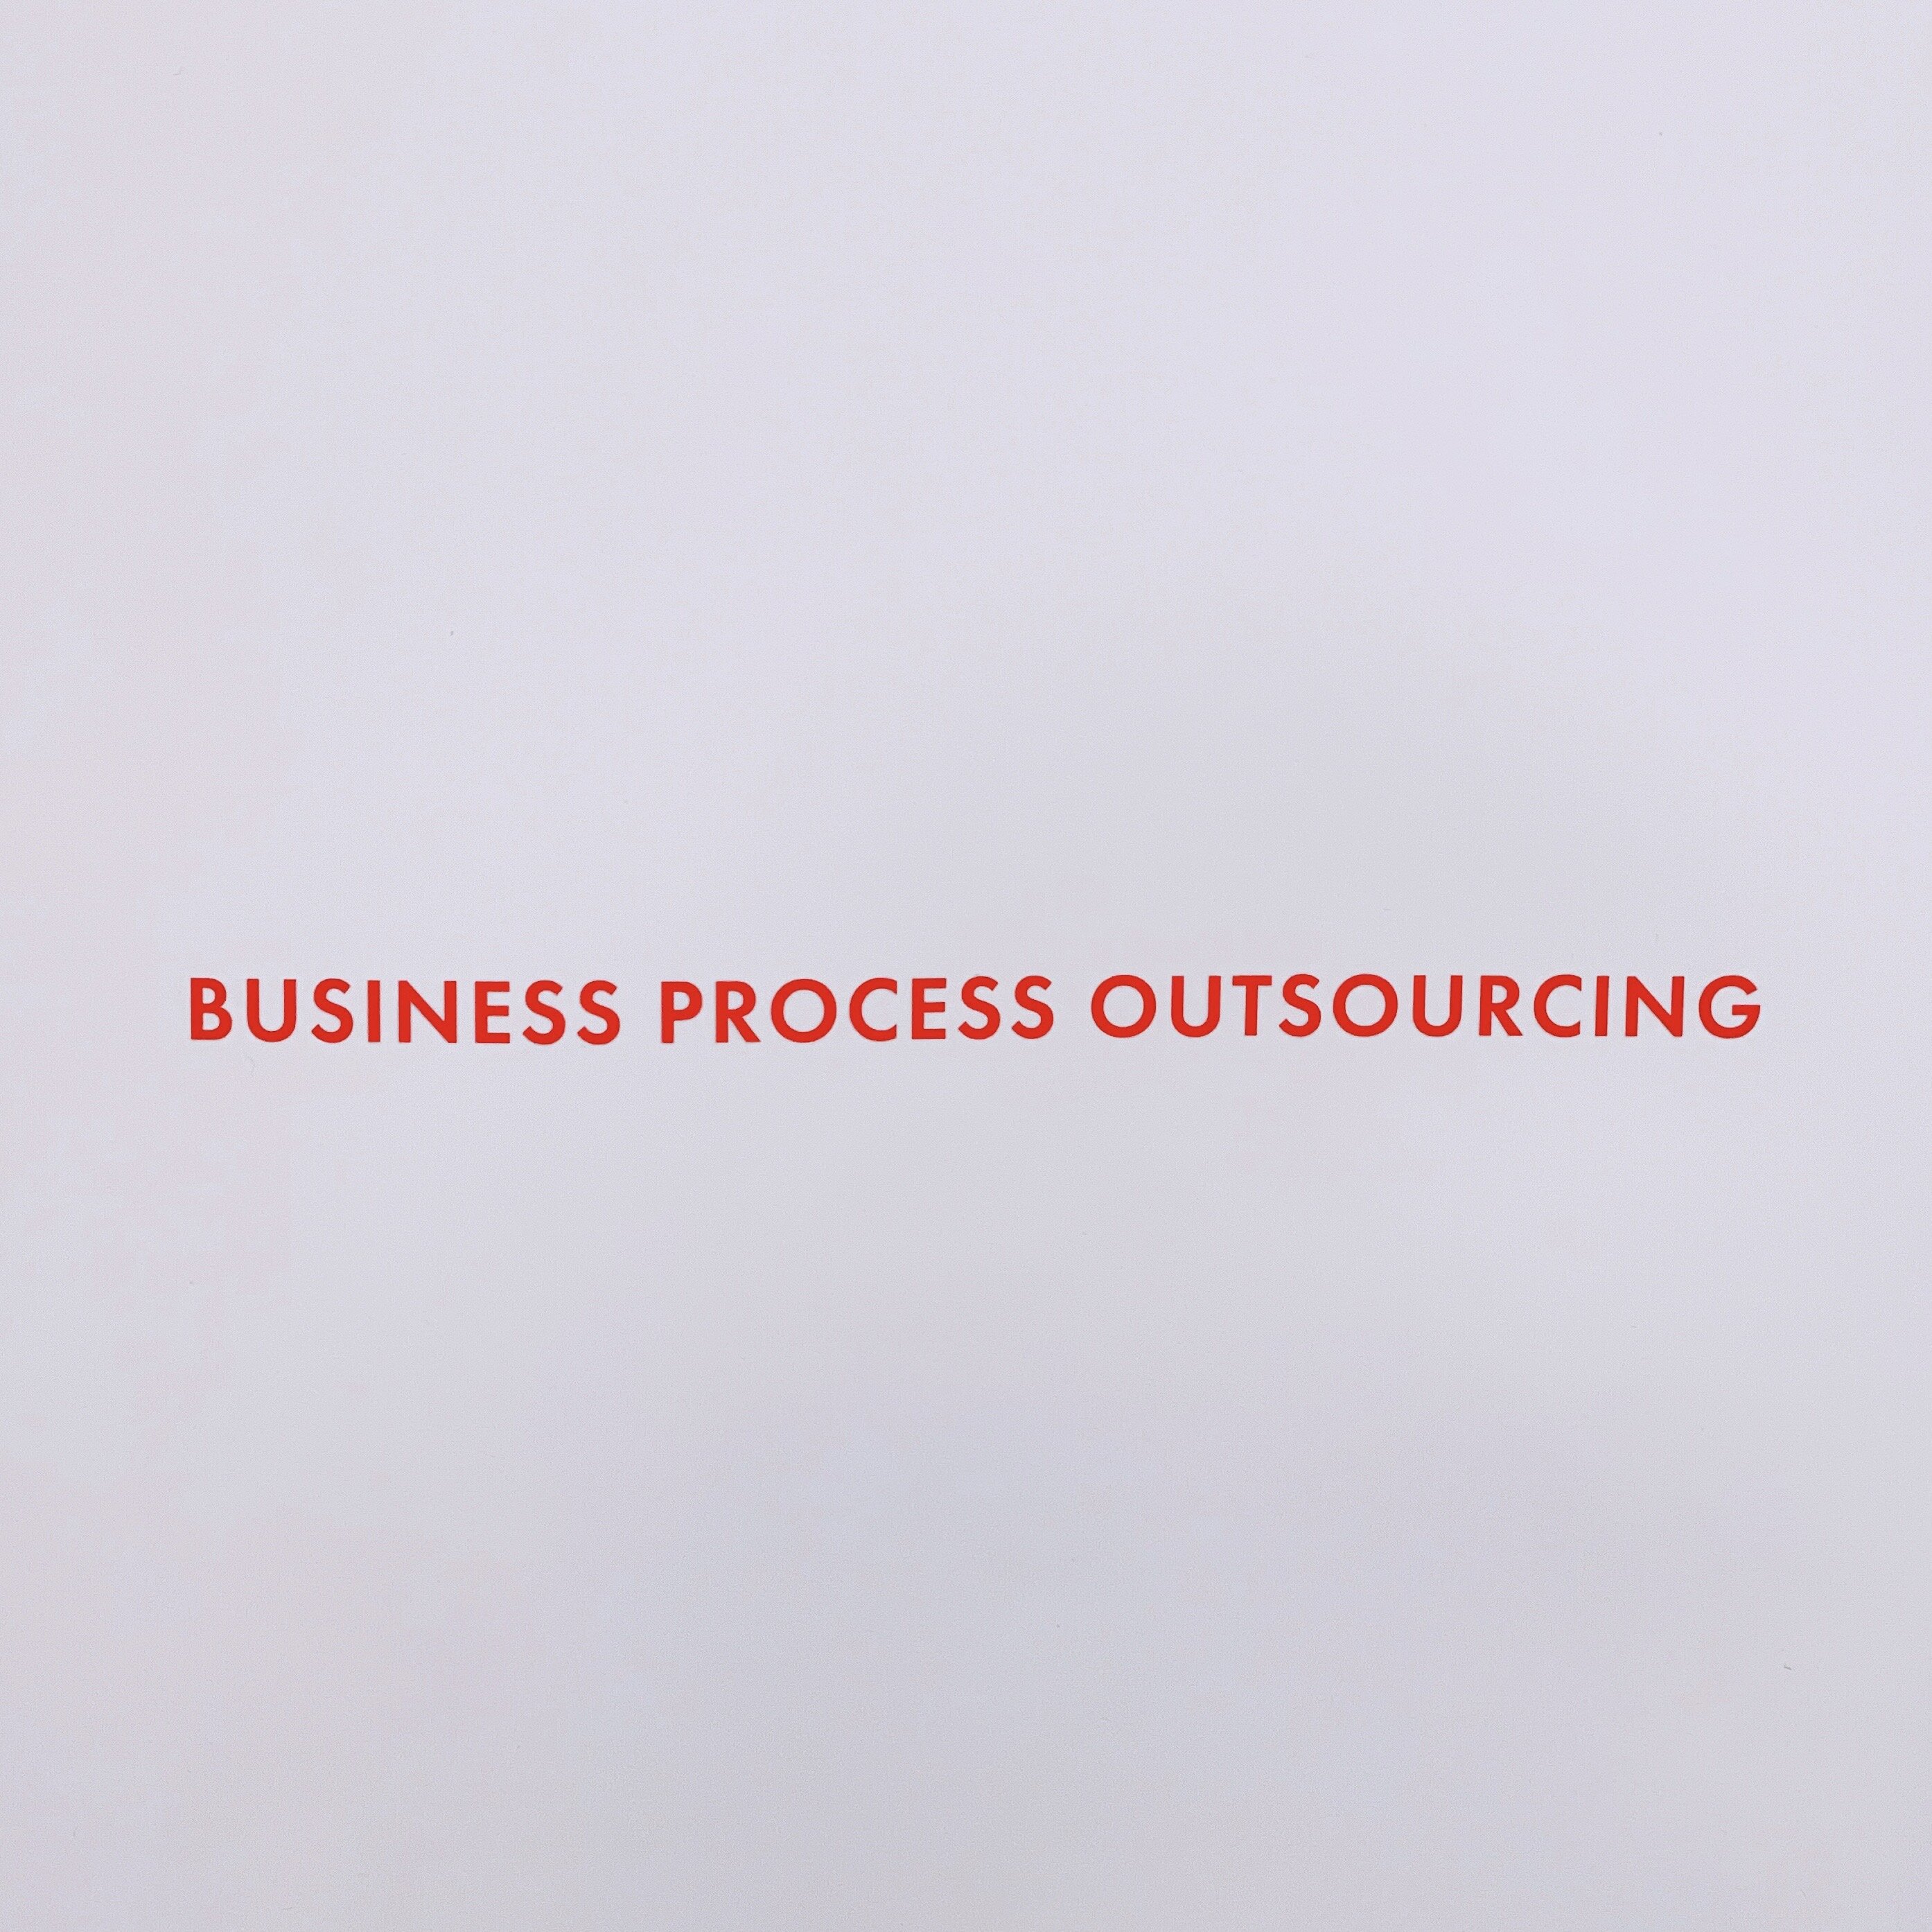 BUSINESS PROCESS OUTSOURCING